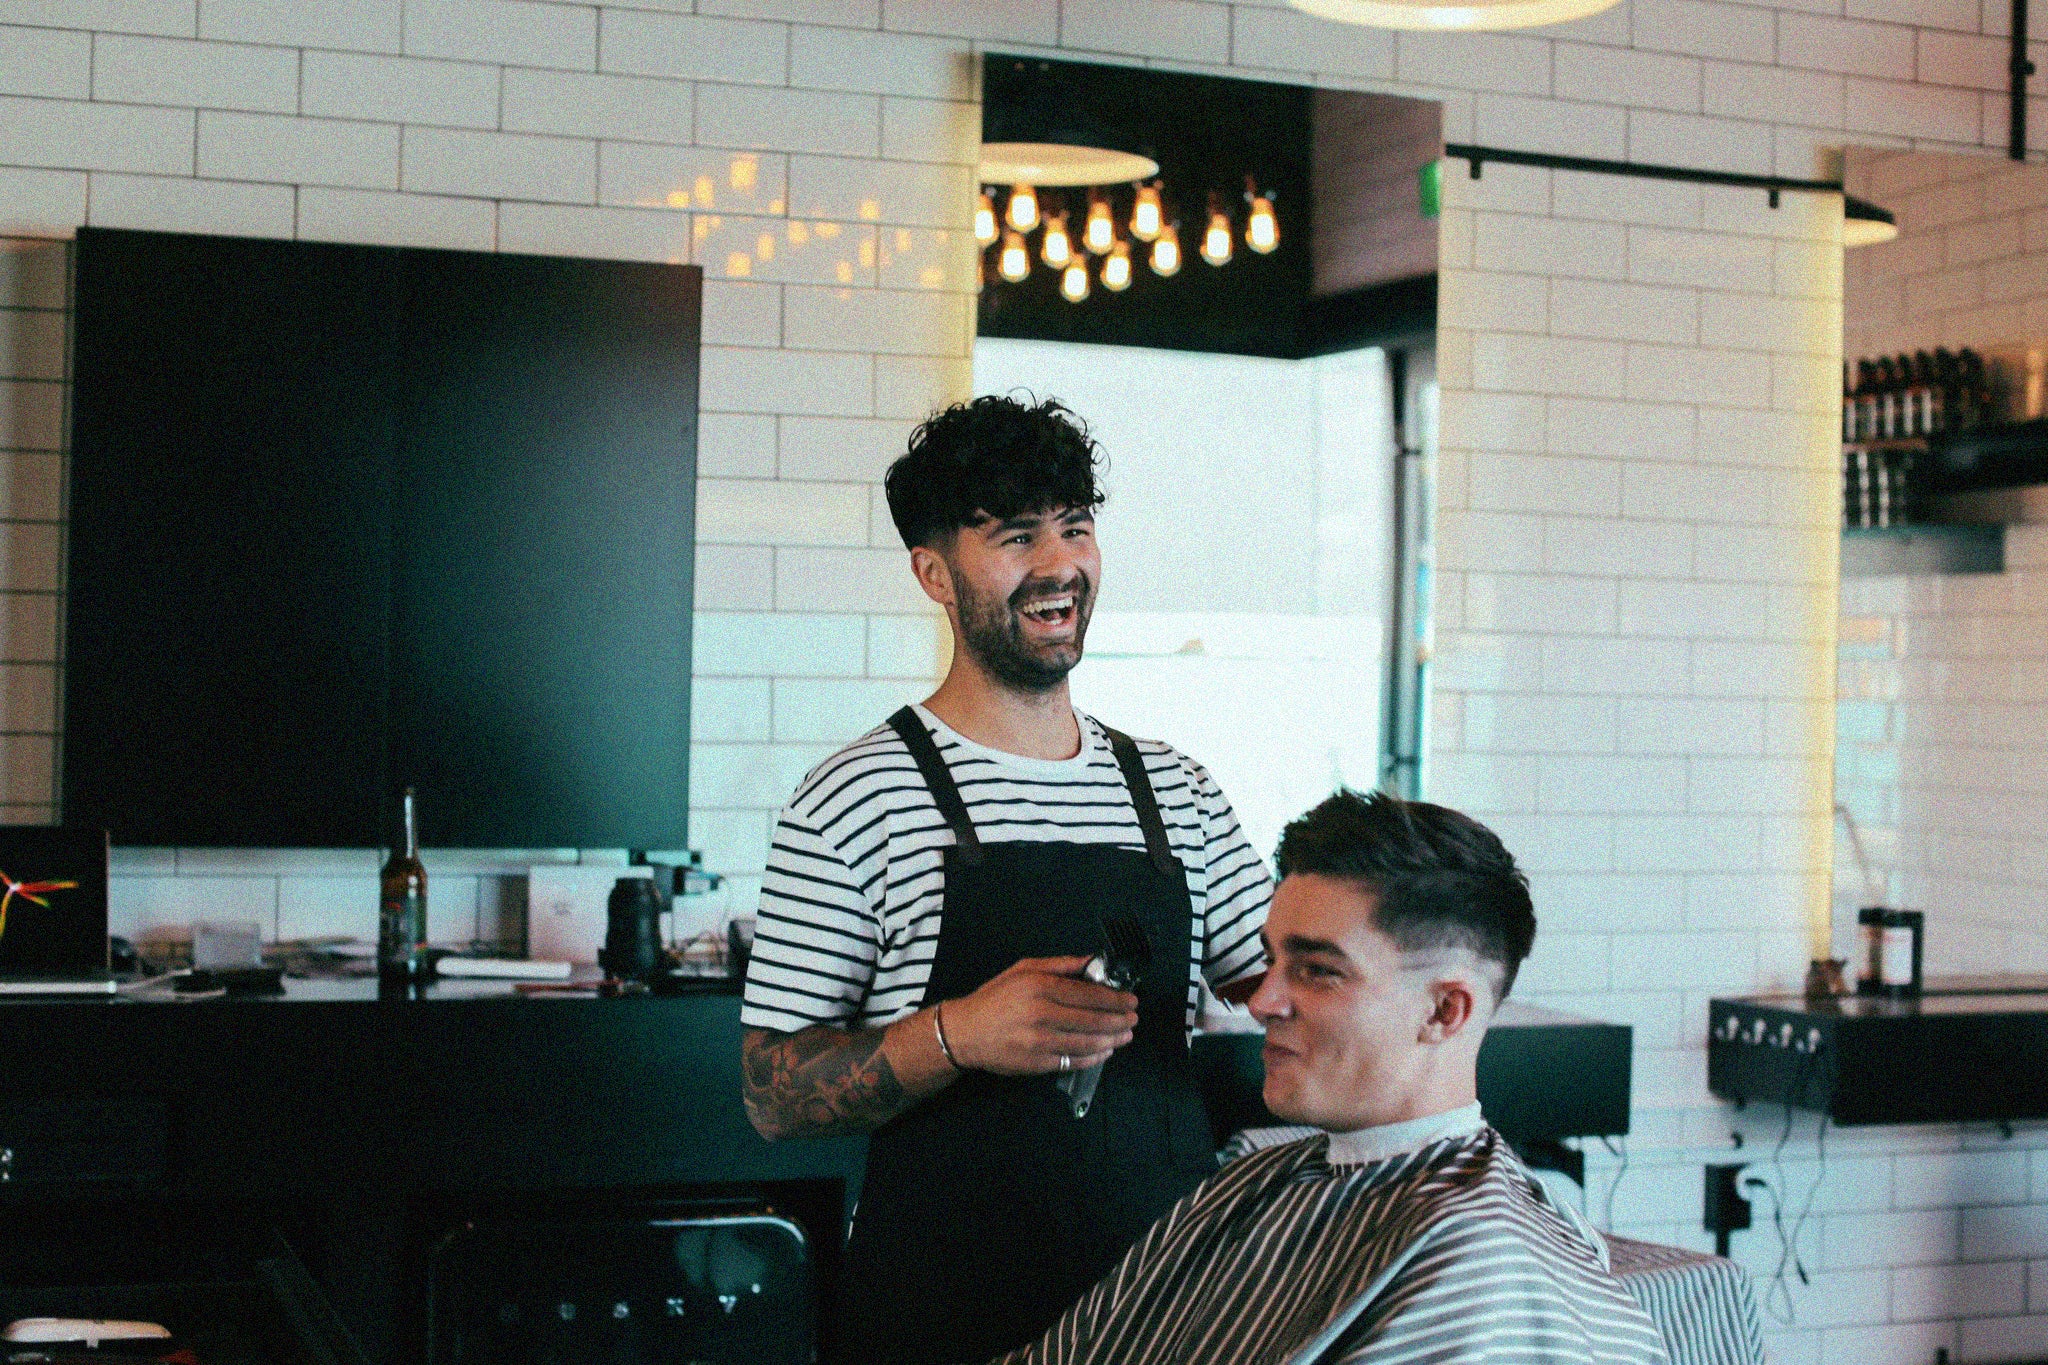 Freshen Up Your Cut With 6  At-Home Grooming Tips, According To A Barber